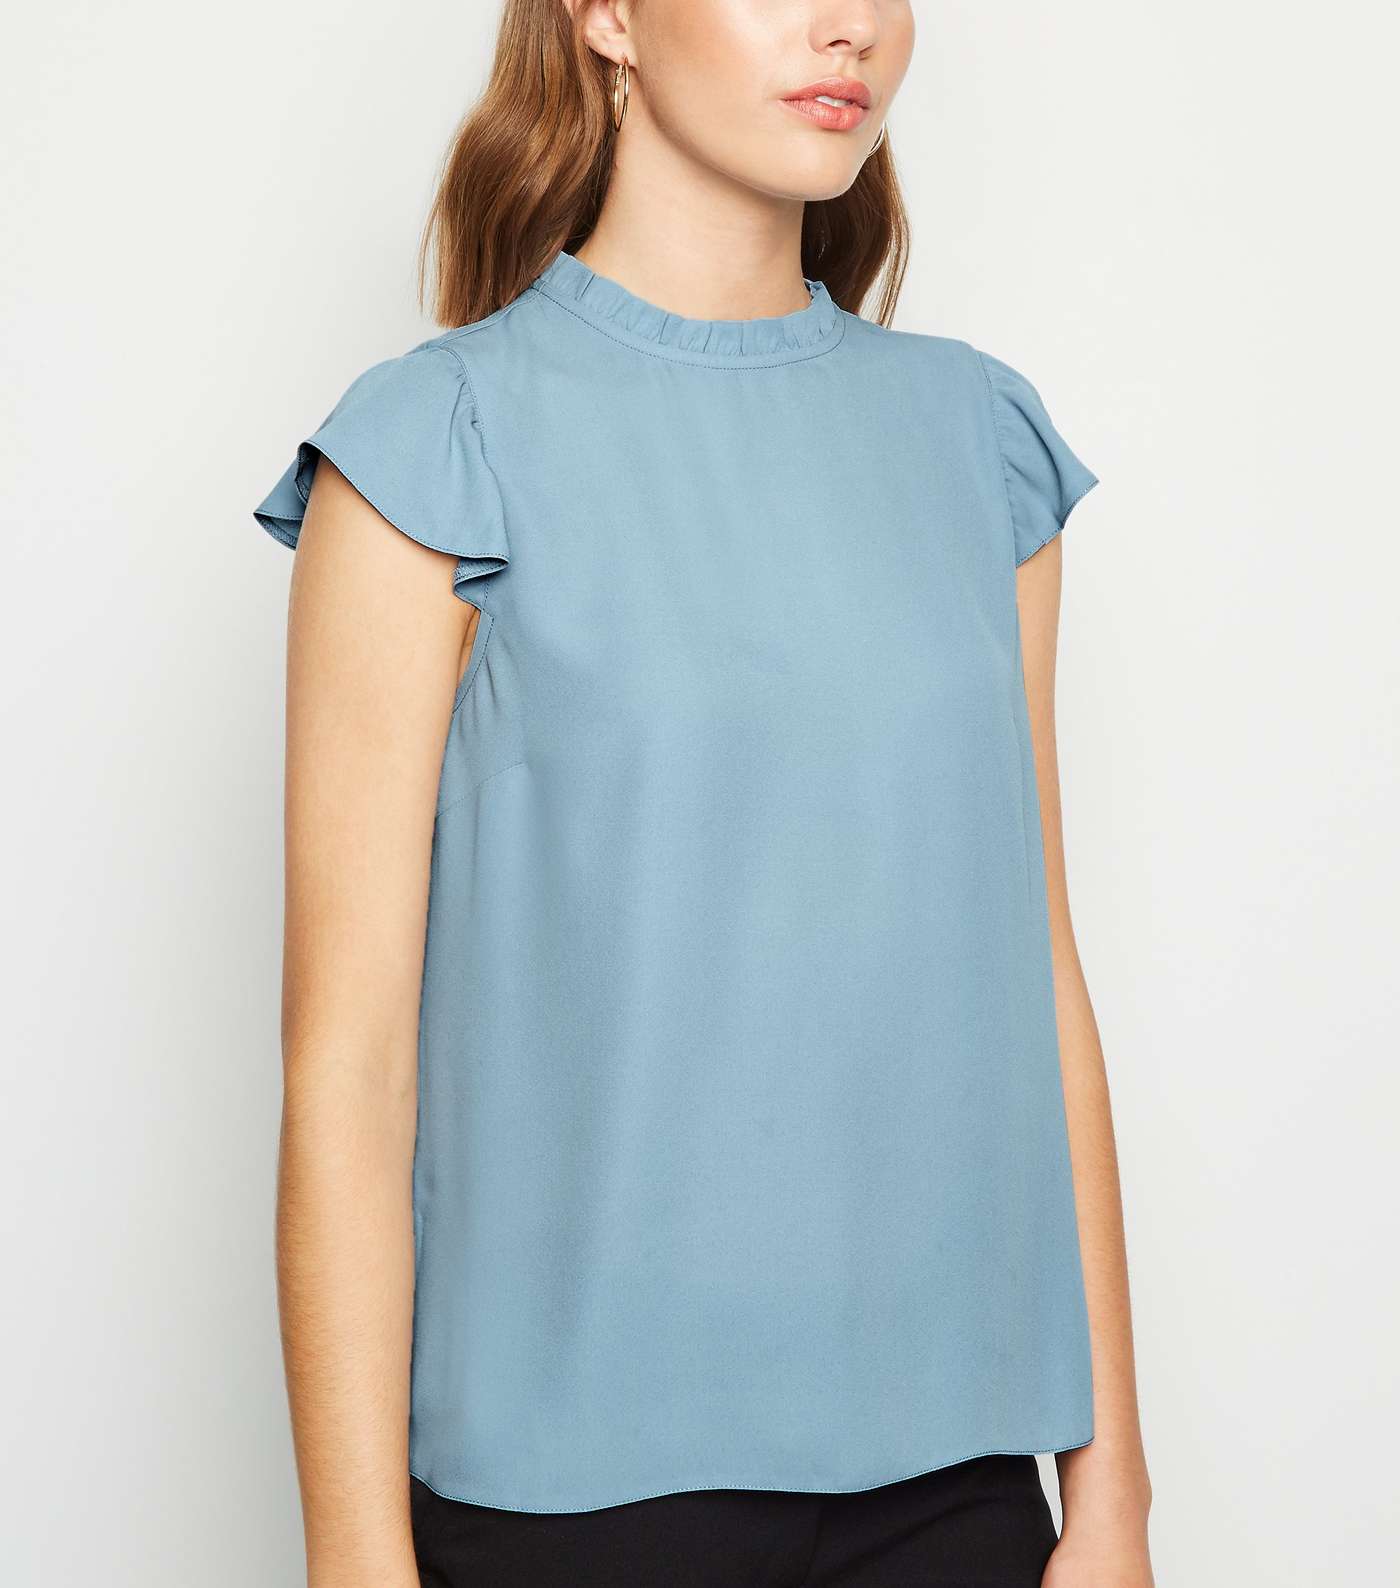 Pale Blue Frill Sleeveless Blouse